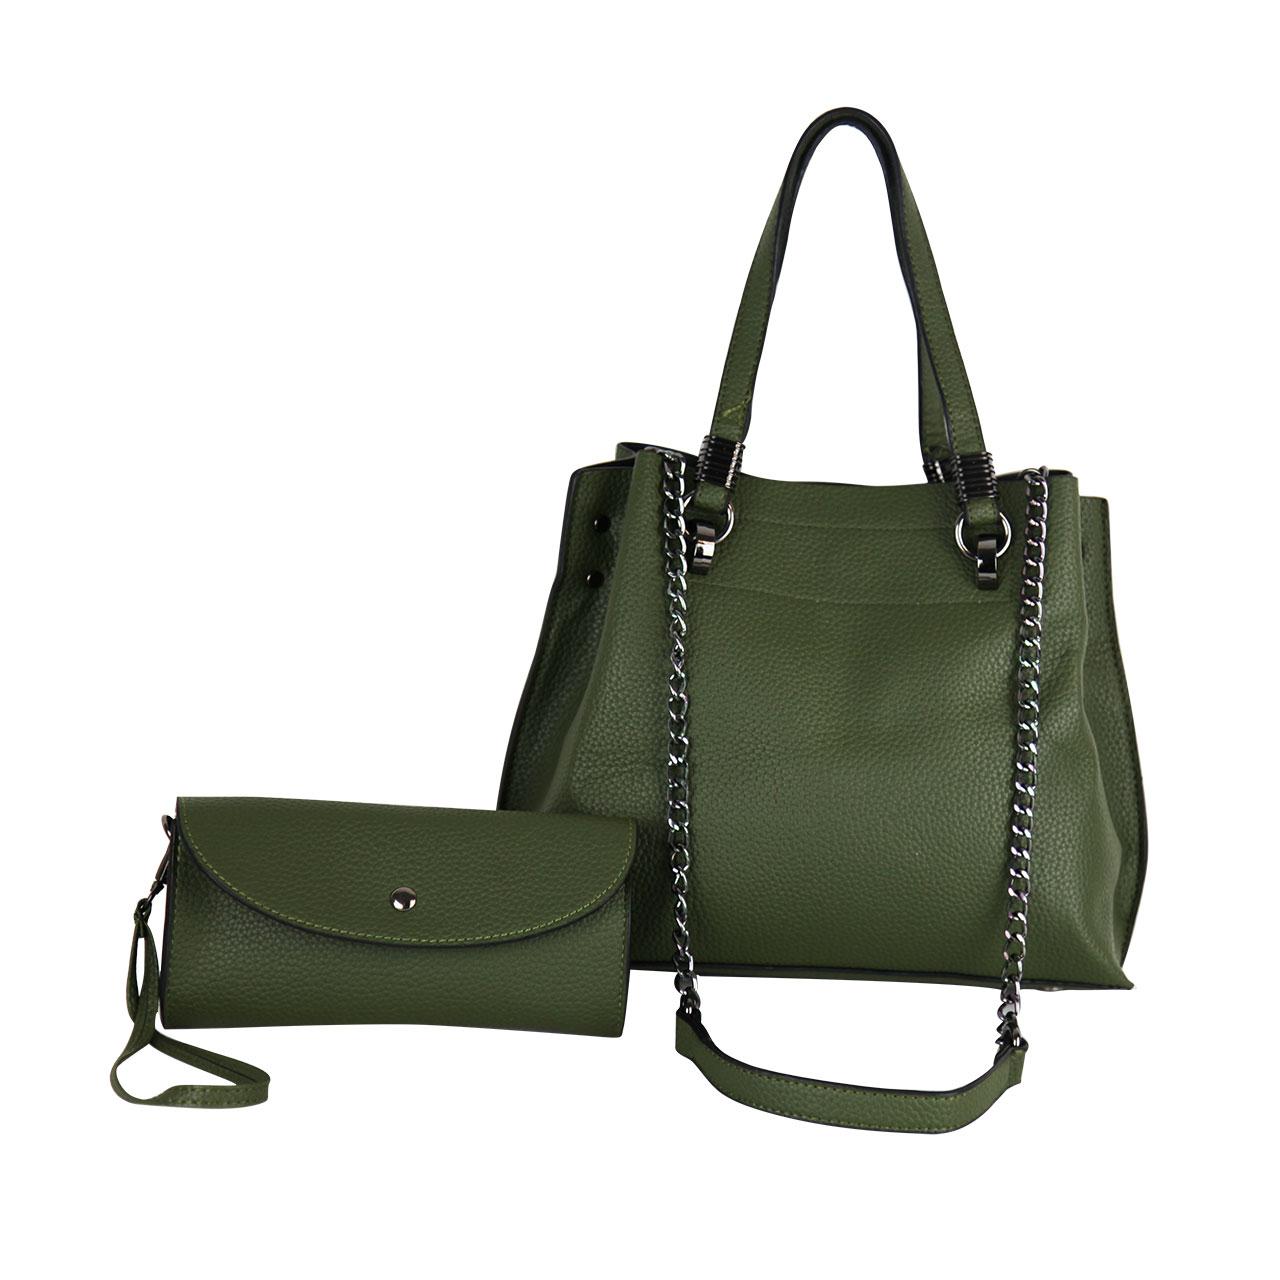 Buy Green Crocodile Pattern Genuine Leather Convertible Bag with Detachable  Shoulder Strap, Leather Handbag, Crossbody Bag, Purse, Leather Bag for  Women at ShopLC.